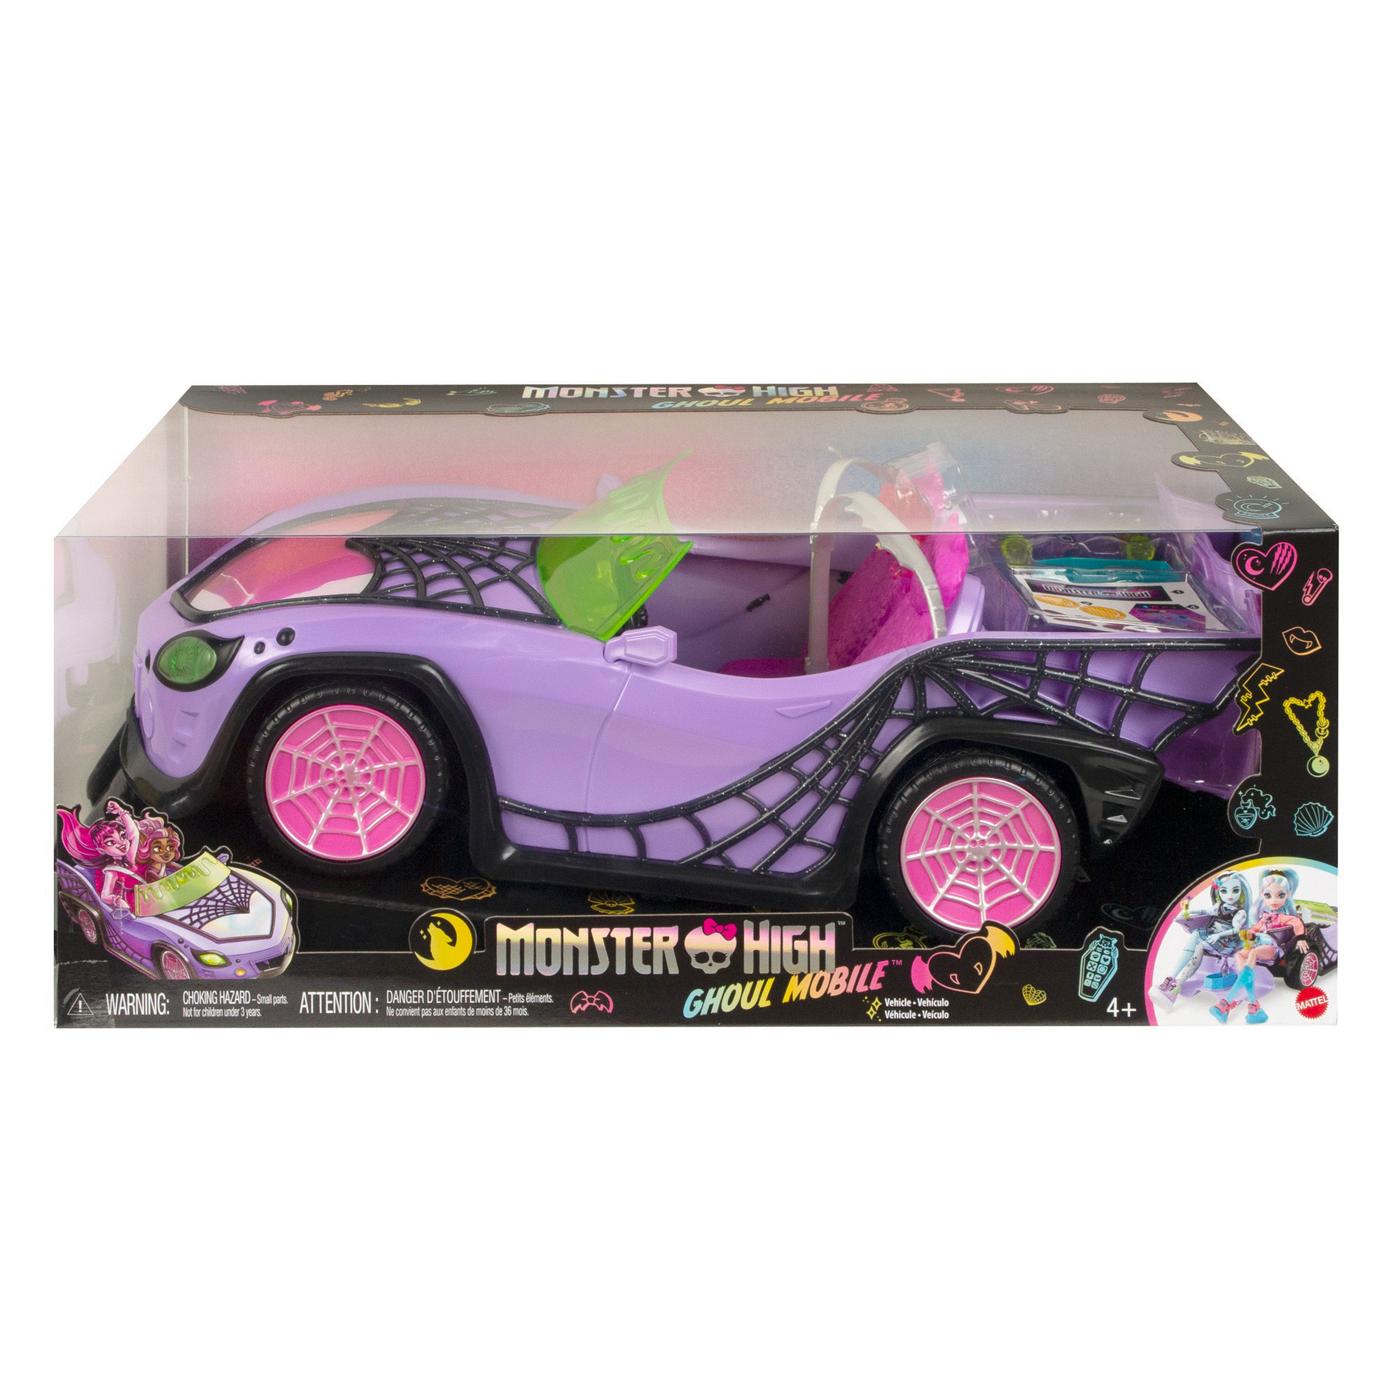 Monster High Ghoul Mobile Vehicle; image 1 of 2